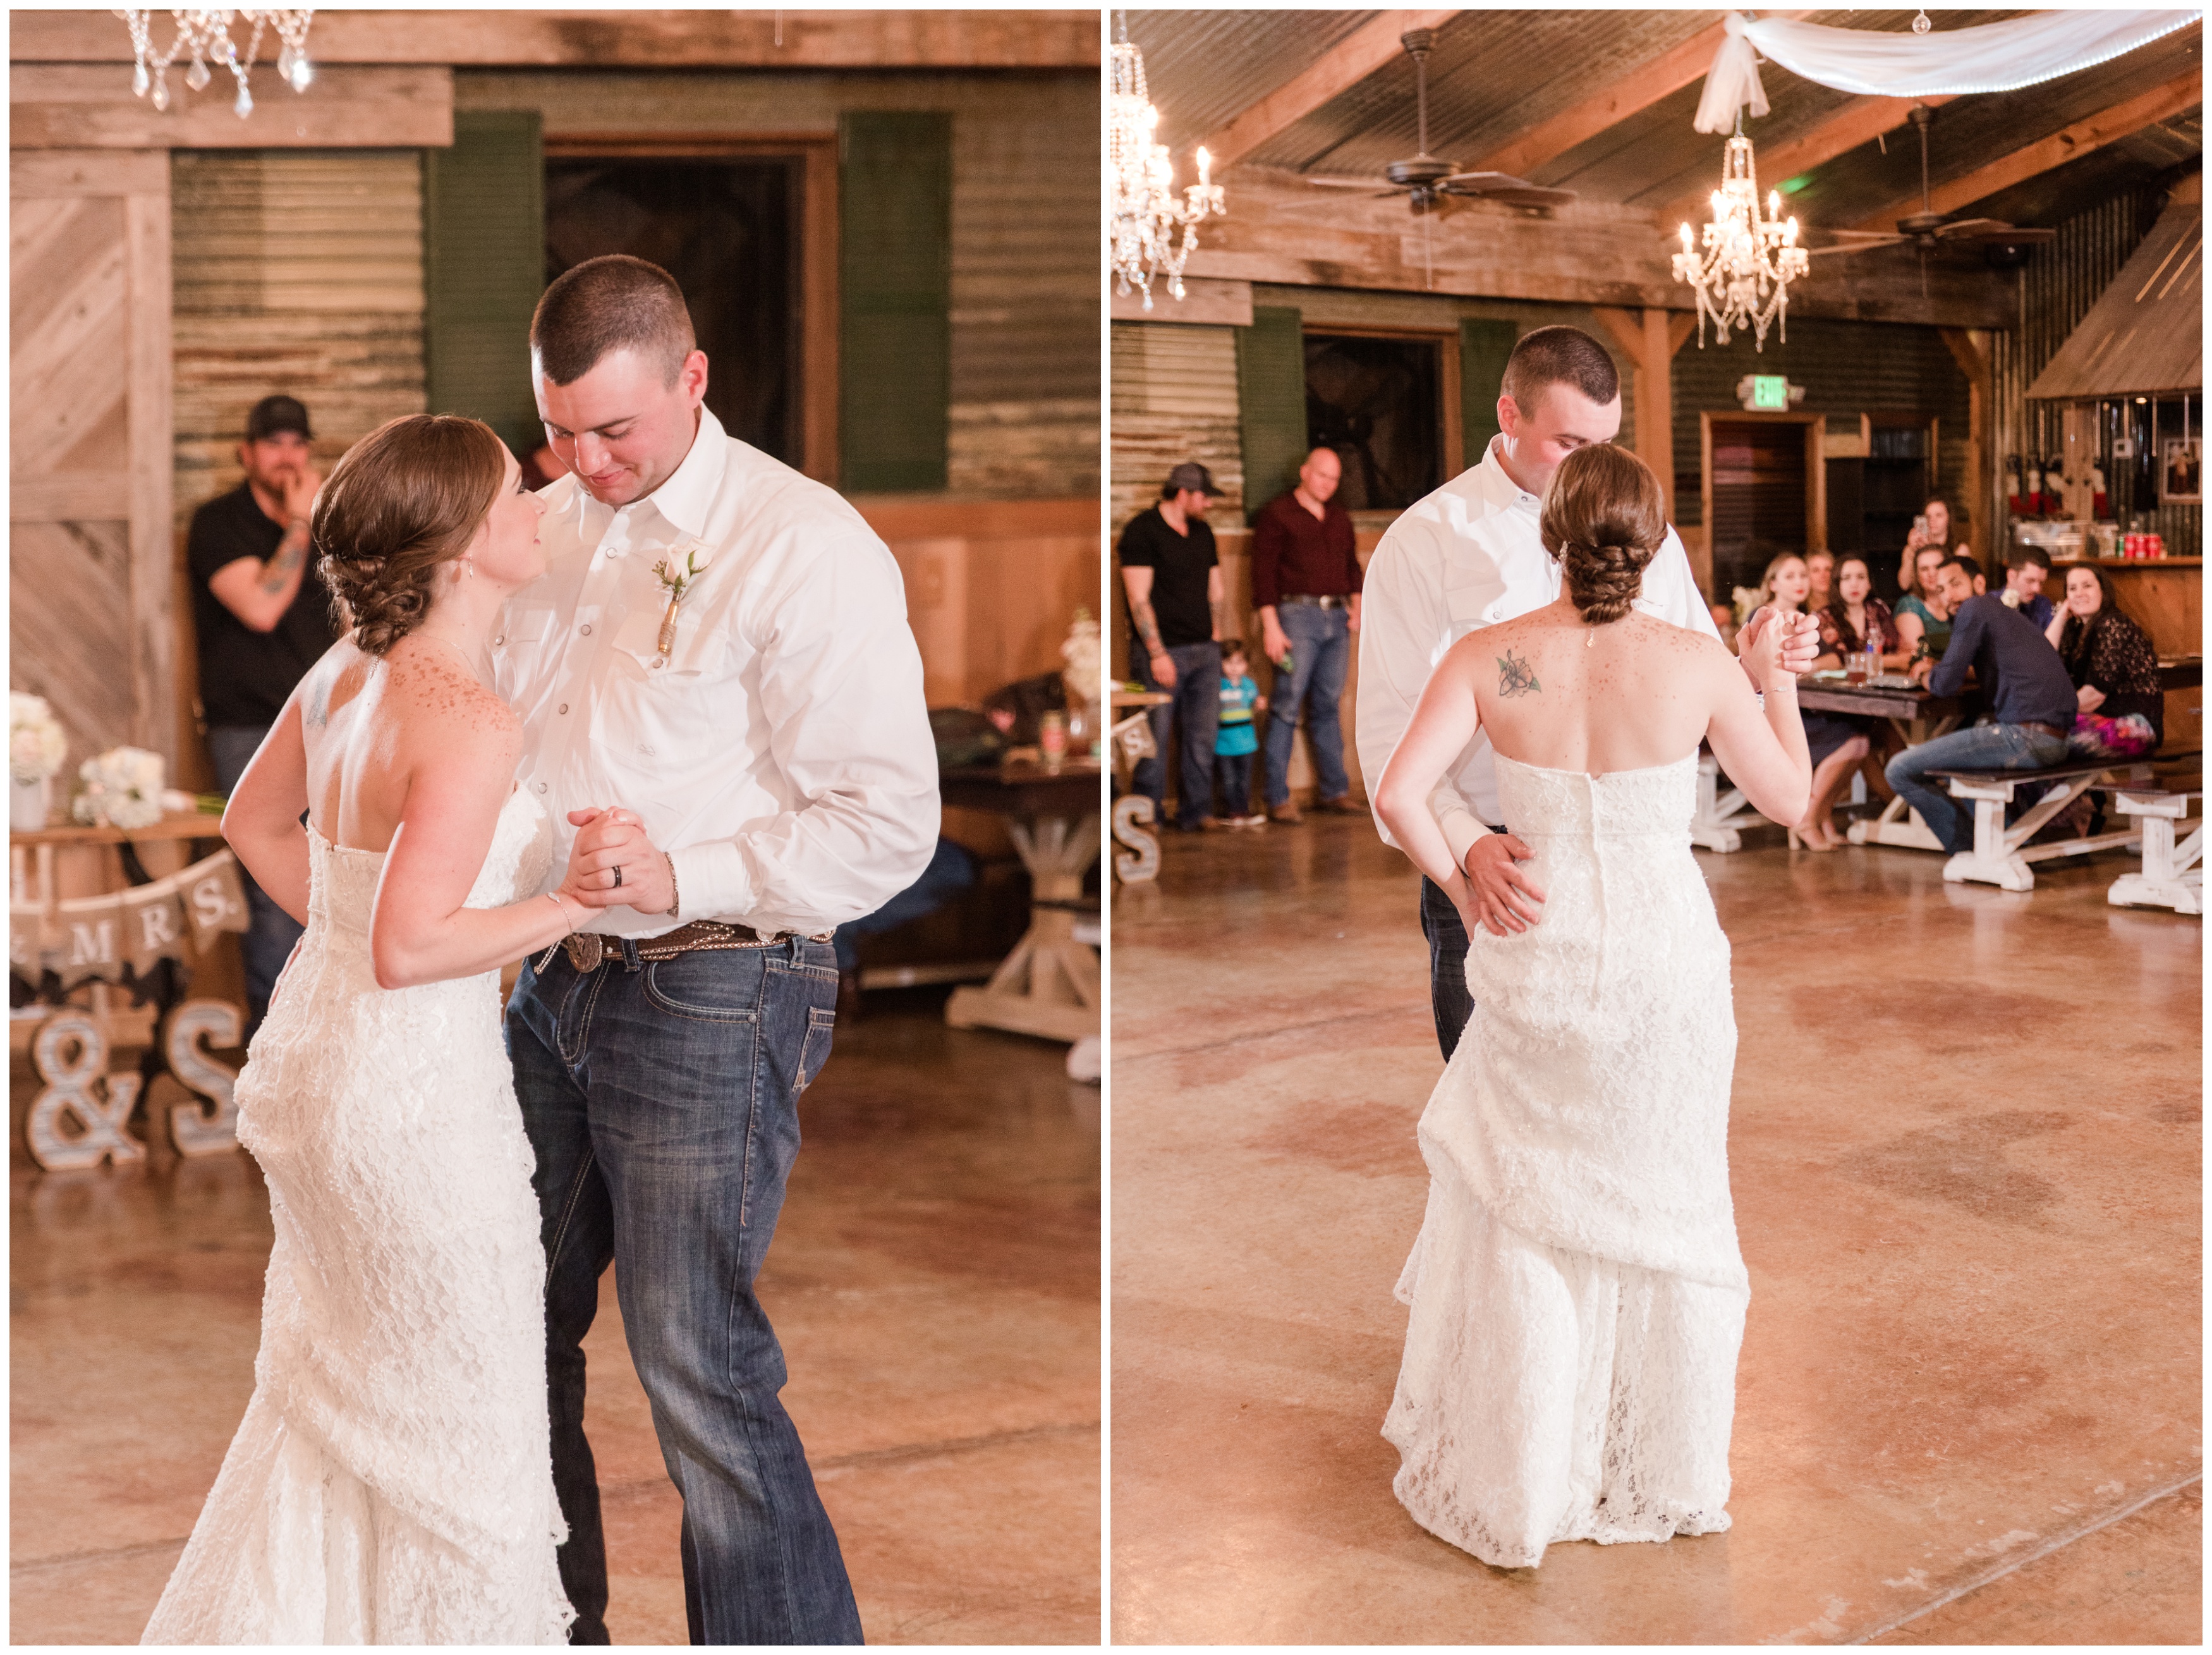 The Barn at Four Pines Wedding in Crosby TX - Kevin and Sammi_0368